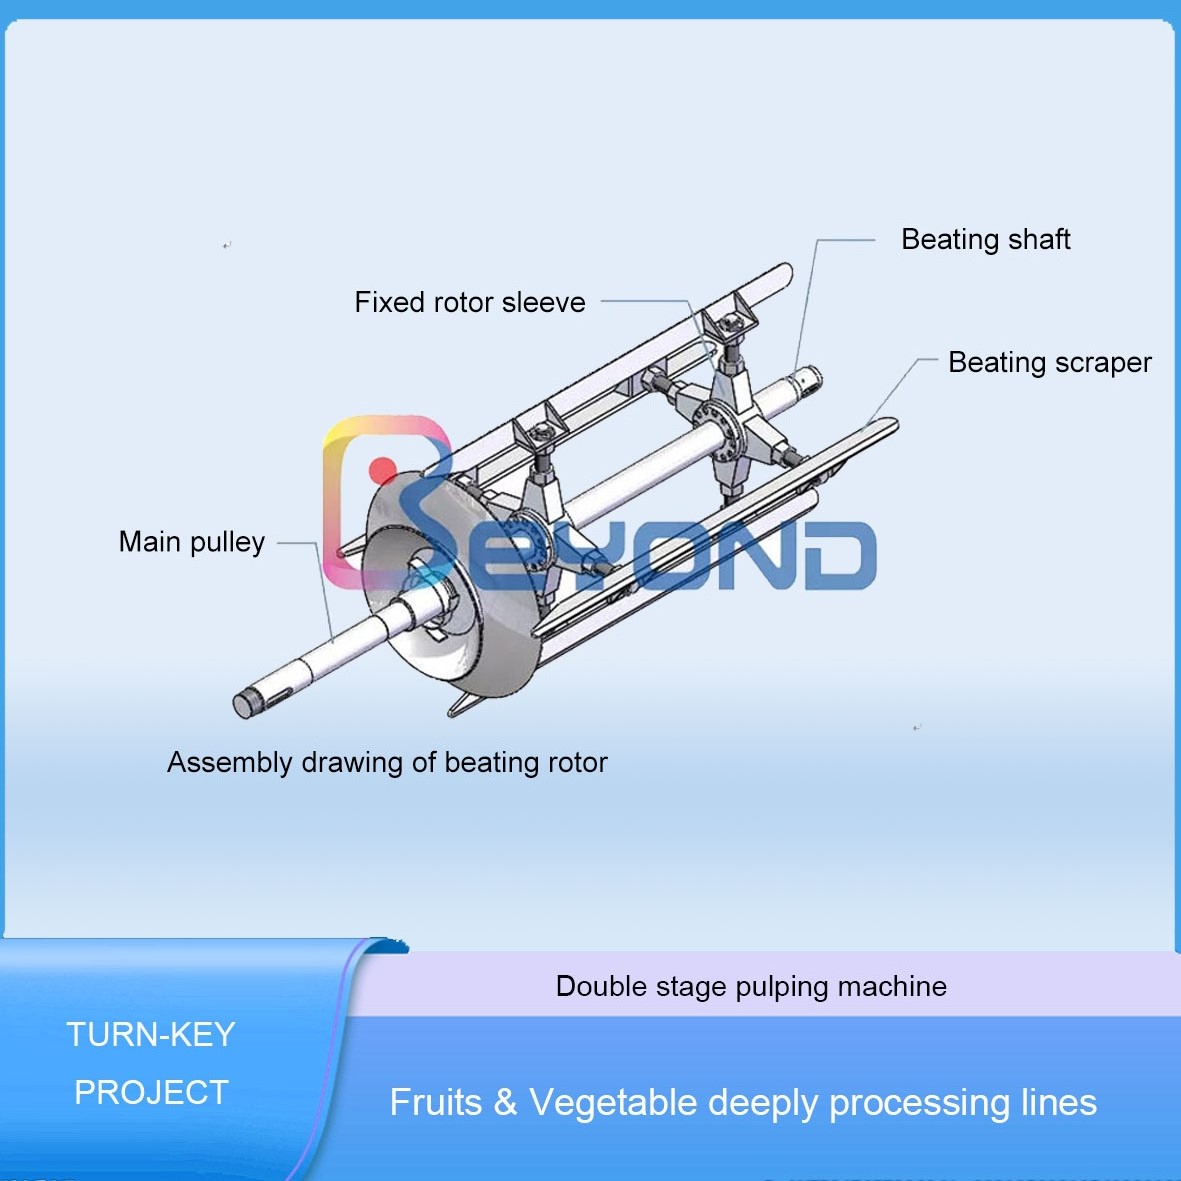 Double stage pulping machine